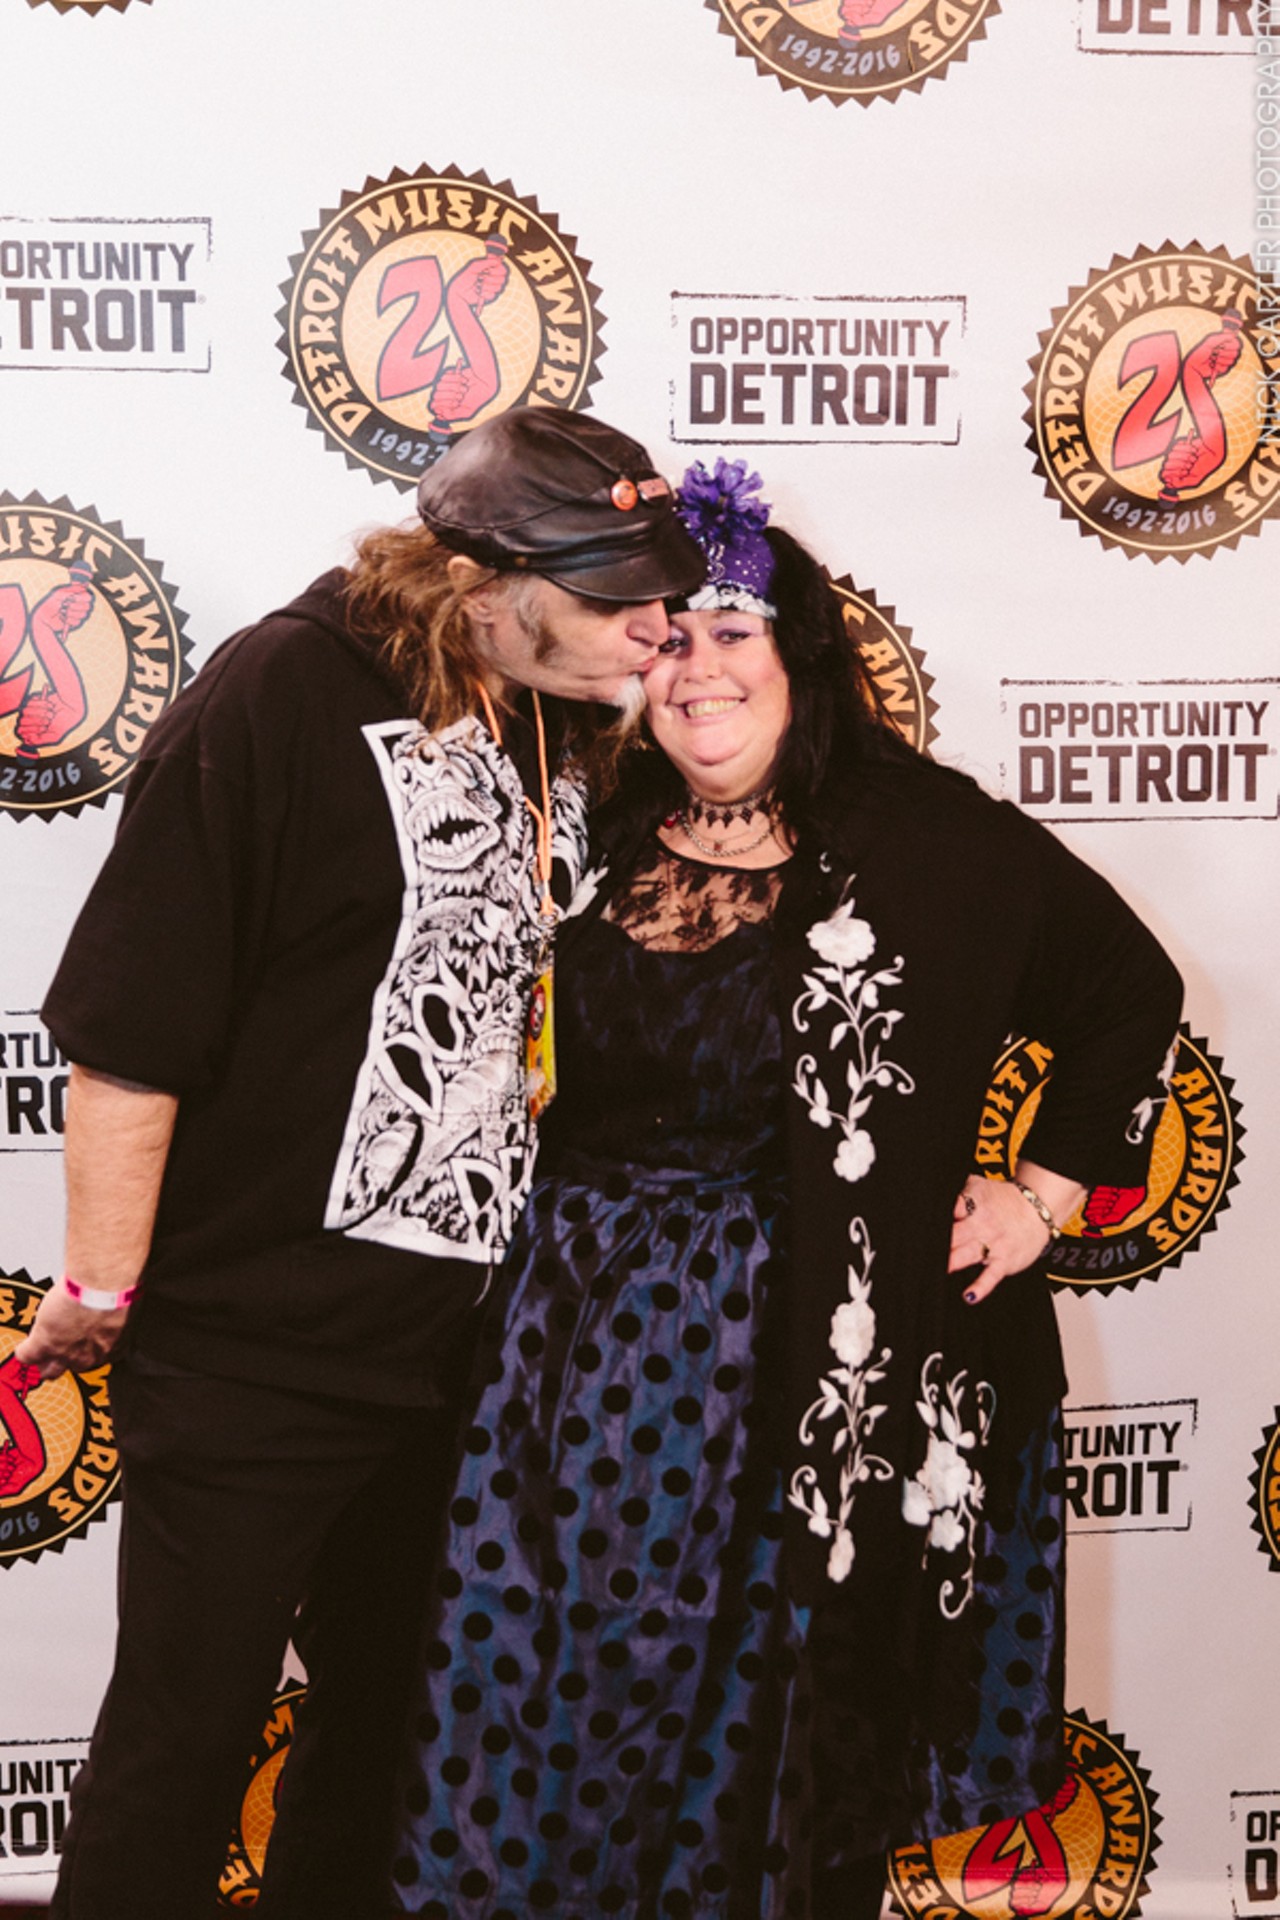 PHOTOS: everything we saw at the 2016 Detroit Music Awards